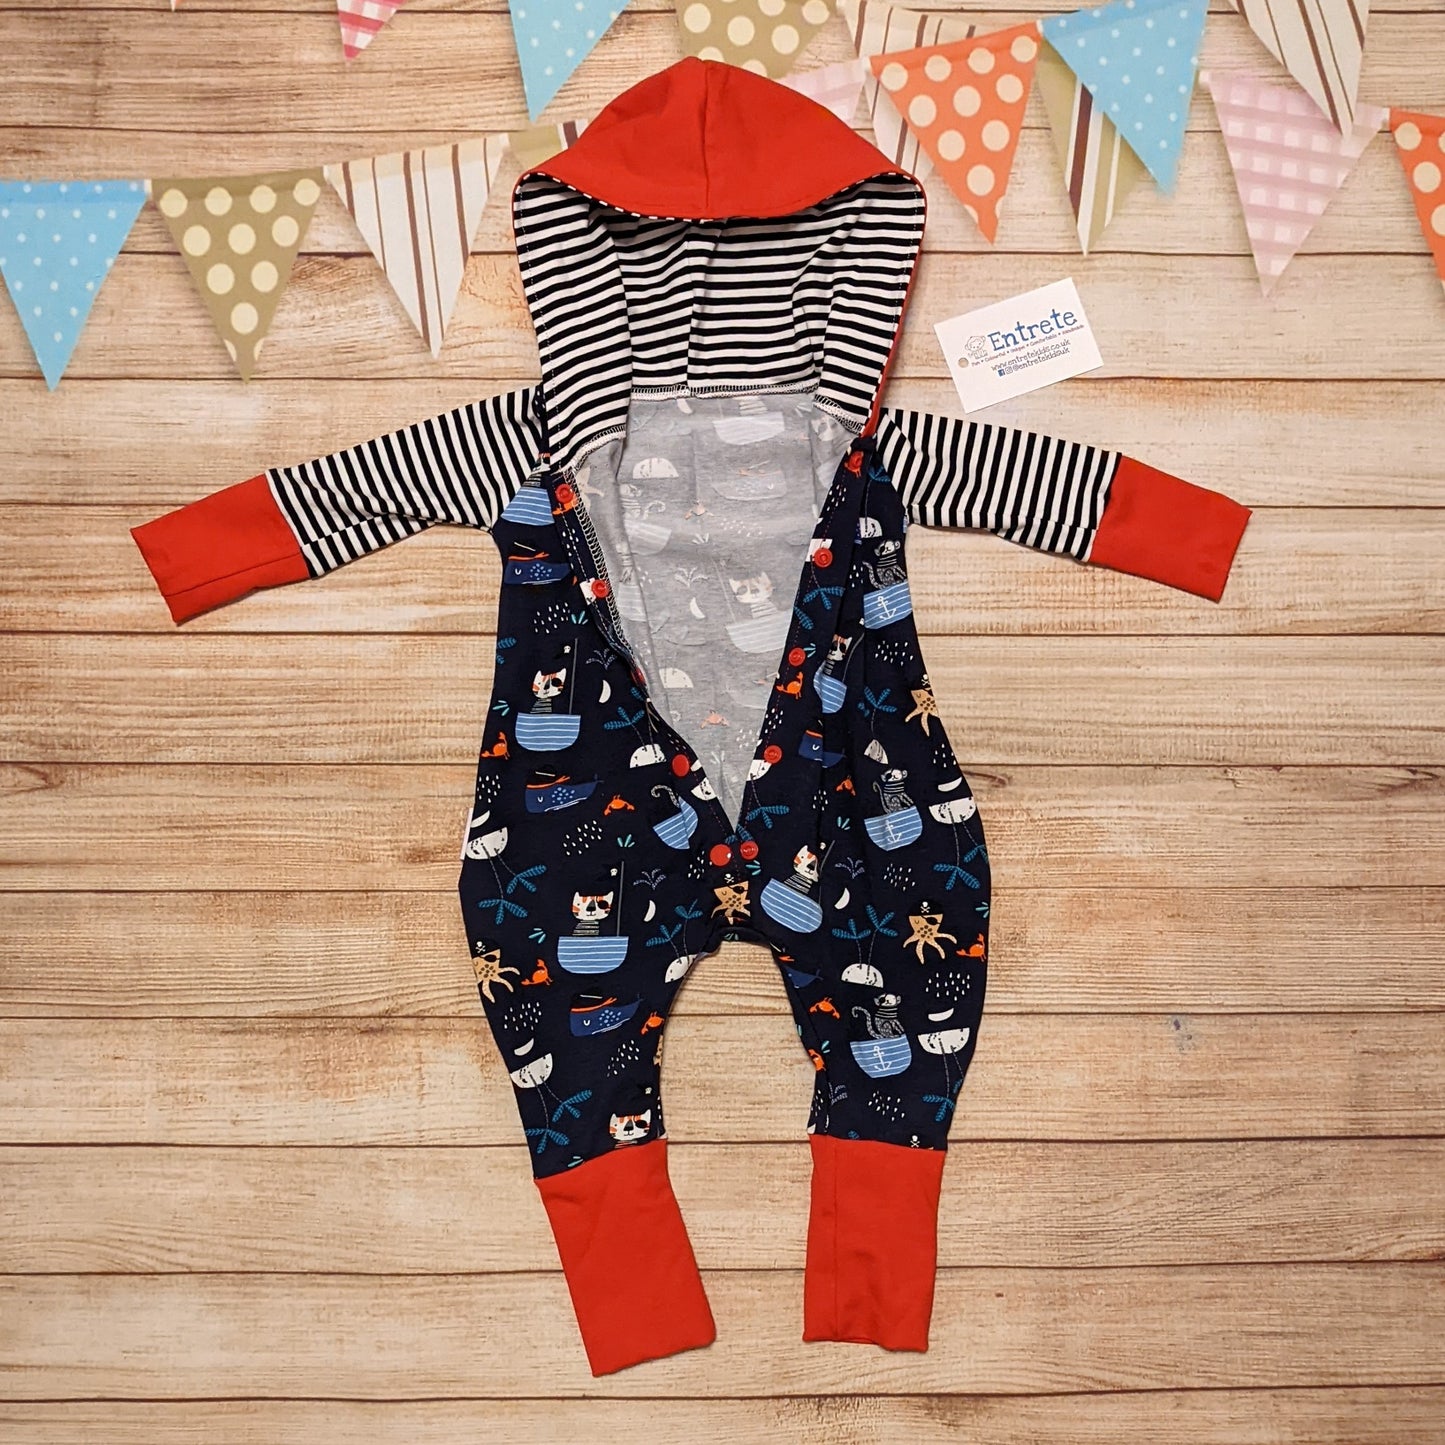 Fun and adventure await, with the awesome pirate cats hooded romper. Shown with the popper entry open. Handmade using pirate cats, red and monochrome striped cotton jersey's.